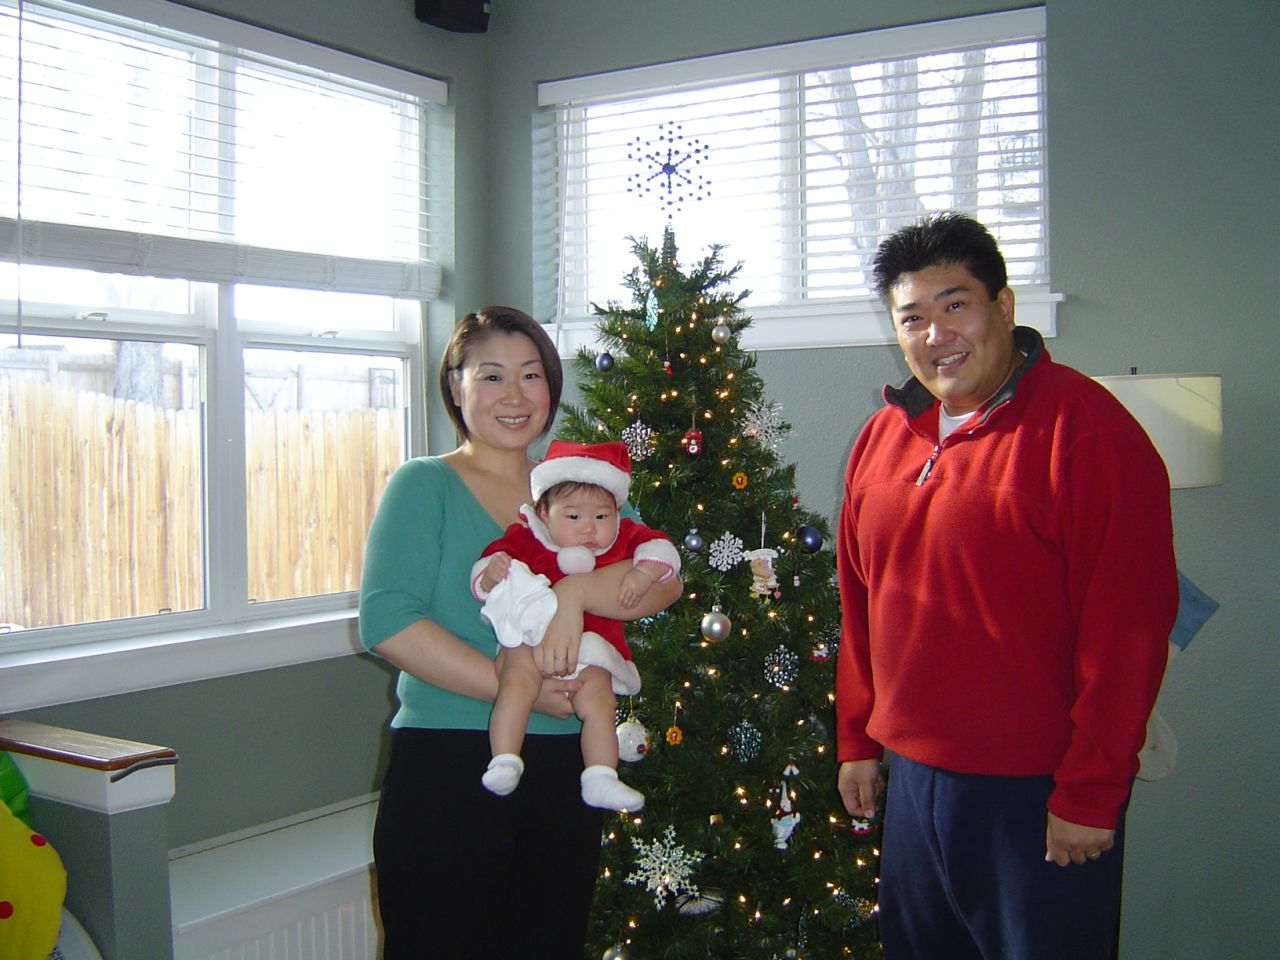 Throughout his life, <a href="http://ireport.cnn.com/docs/DOC-1155784">Yusuke Kirimoto </a>was overweight. He is pictured here in December 2006 with his wife and daughter in their Westminster, Colorado, home.